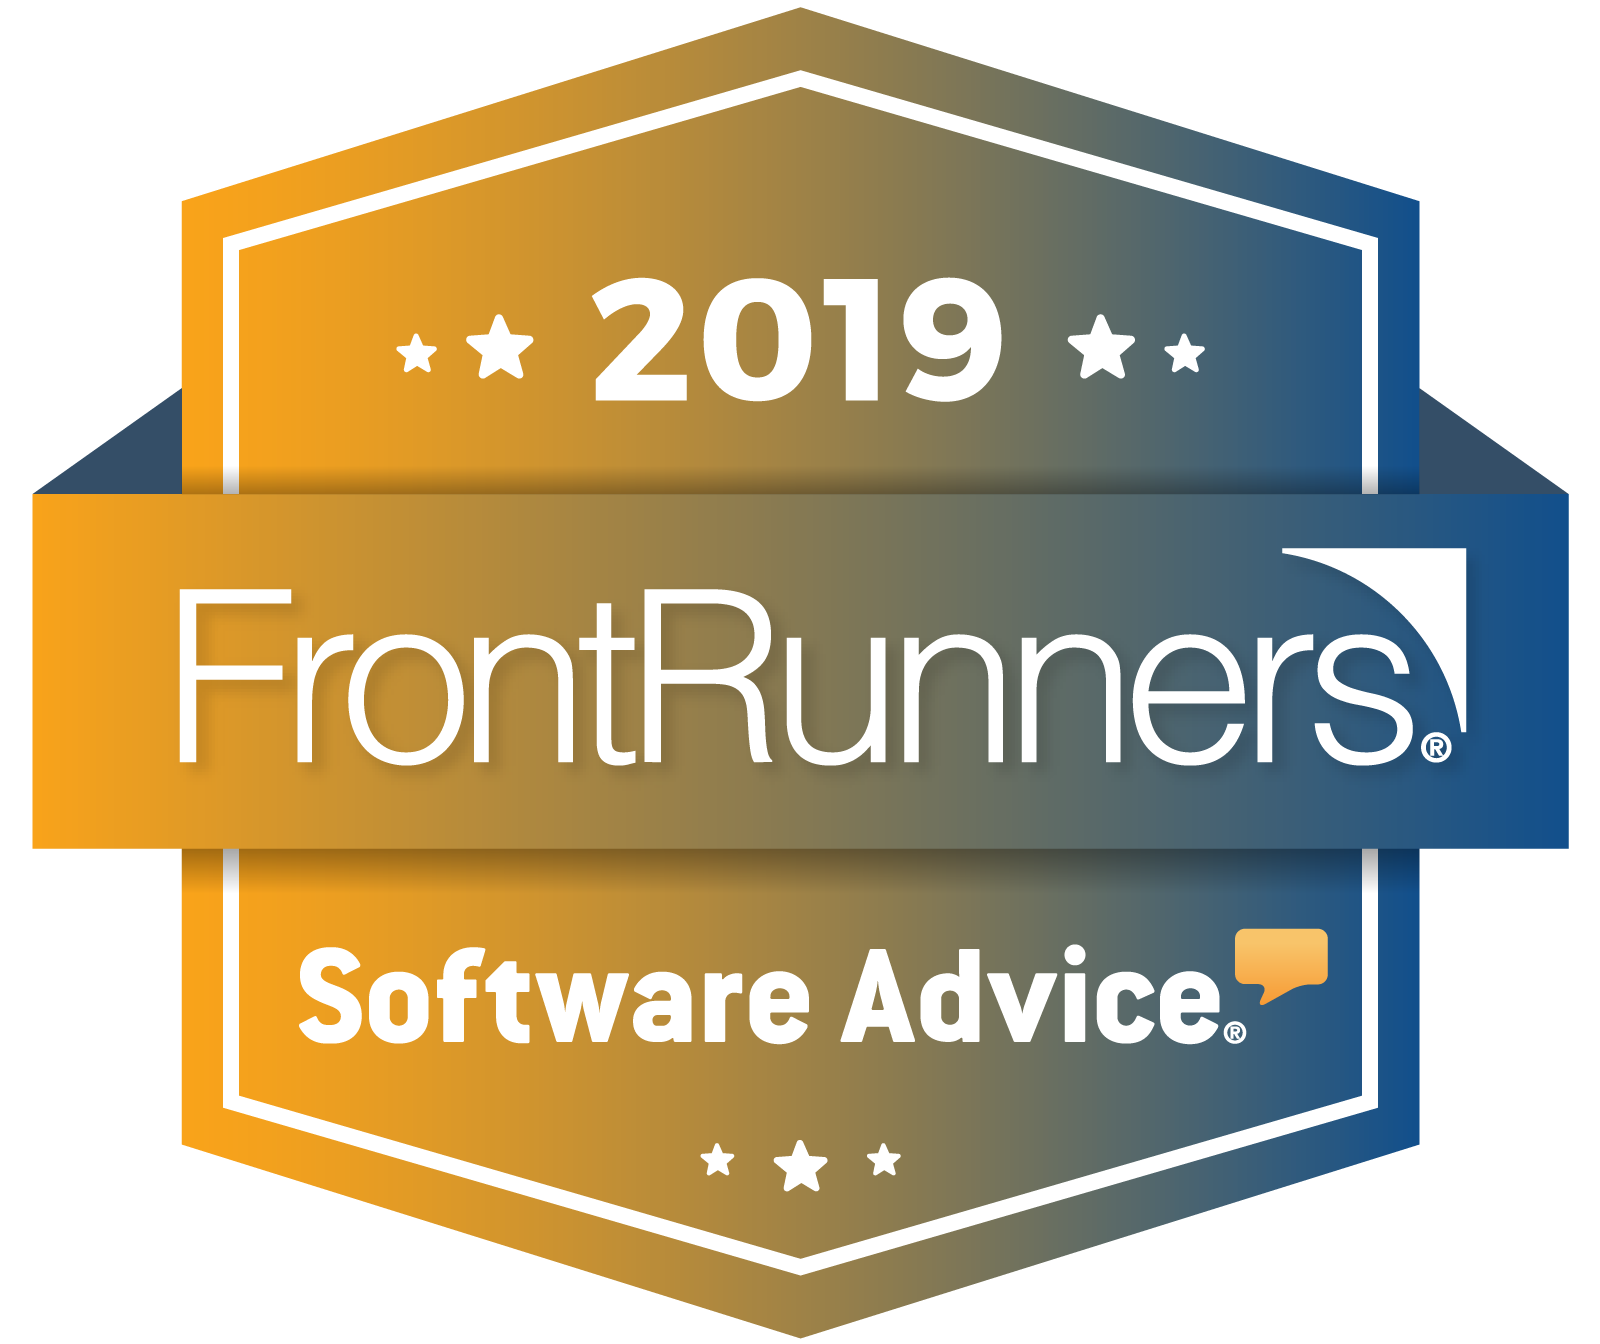 Re-Leased has just been named a FrontRunner for property management on Software Advice! Out of an evaluation of 170 Property Management products, only 15 with the top scores for Usability and User Recommended made the cut as FrontRunners.